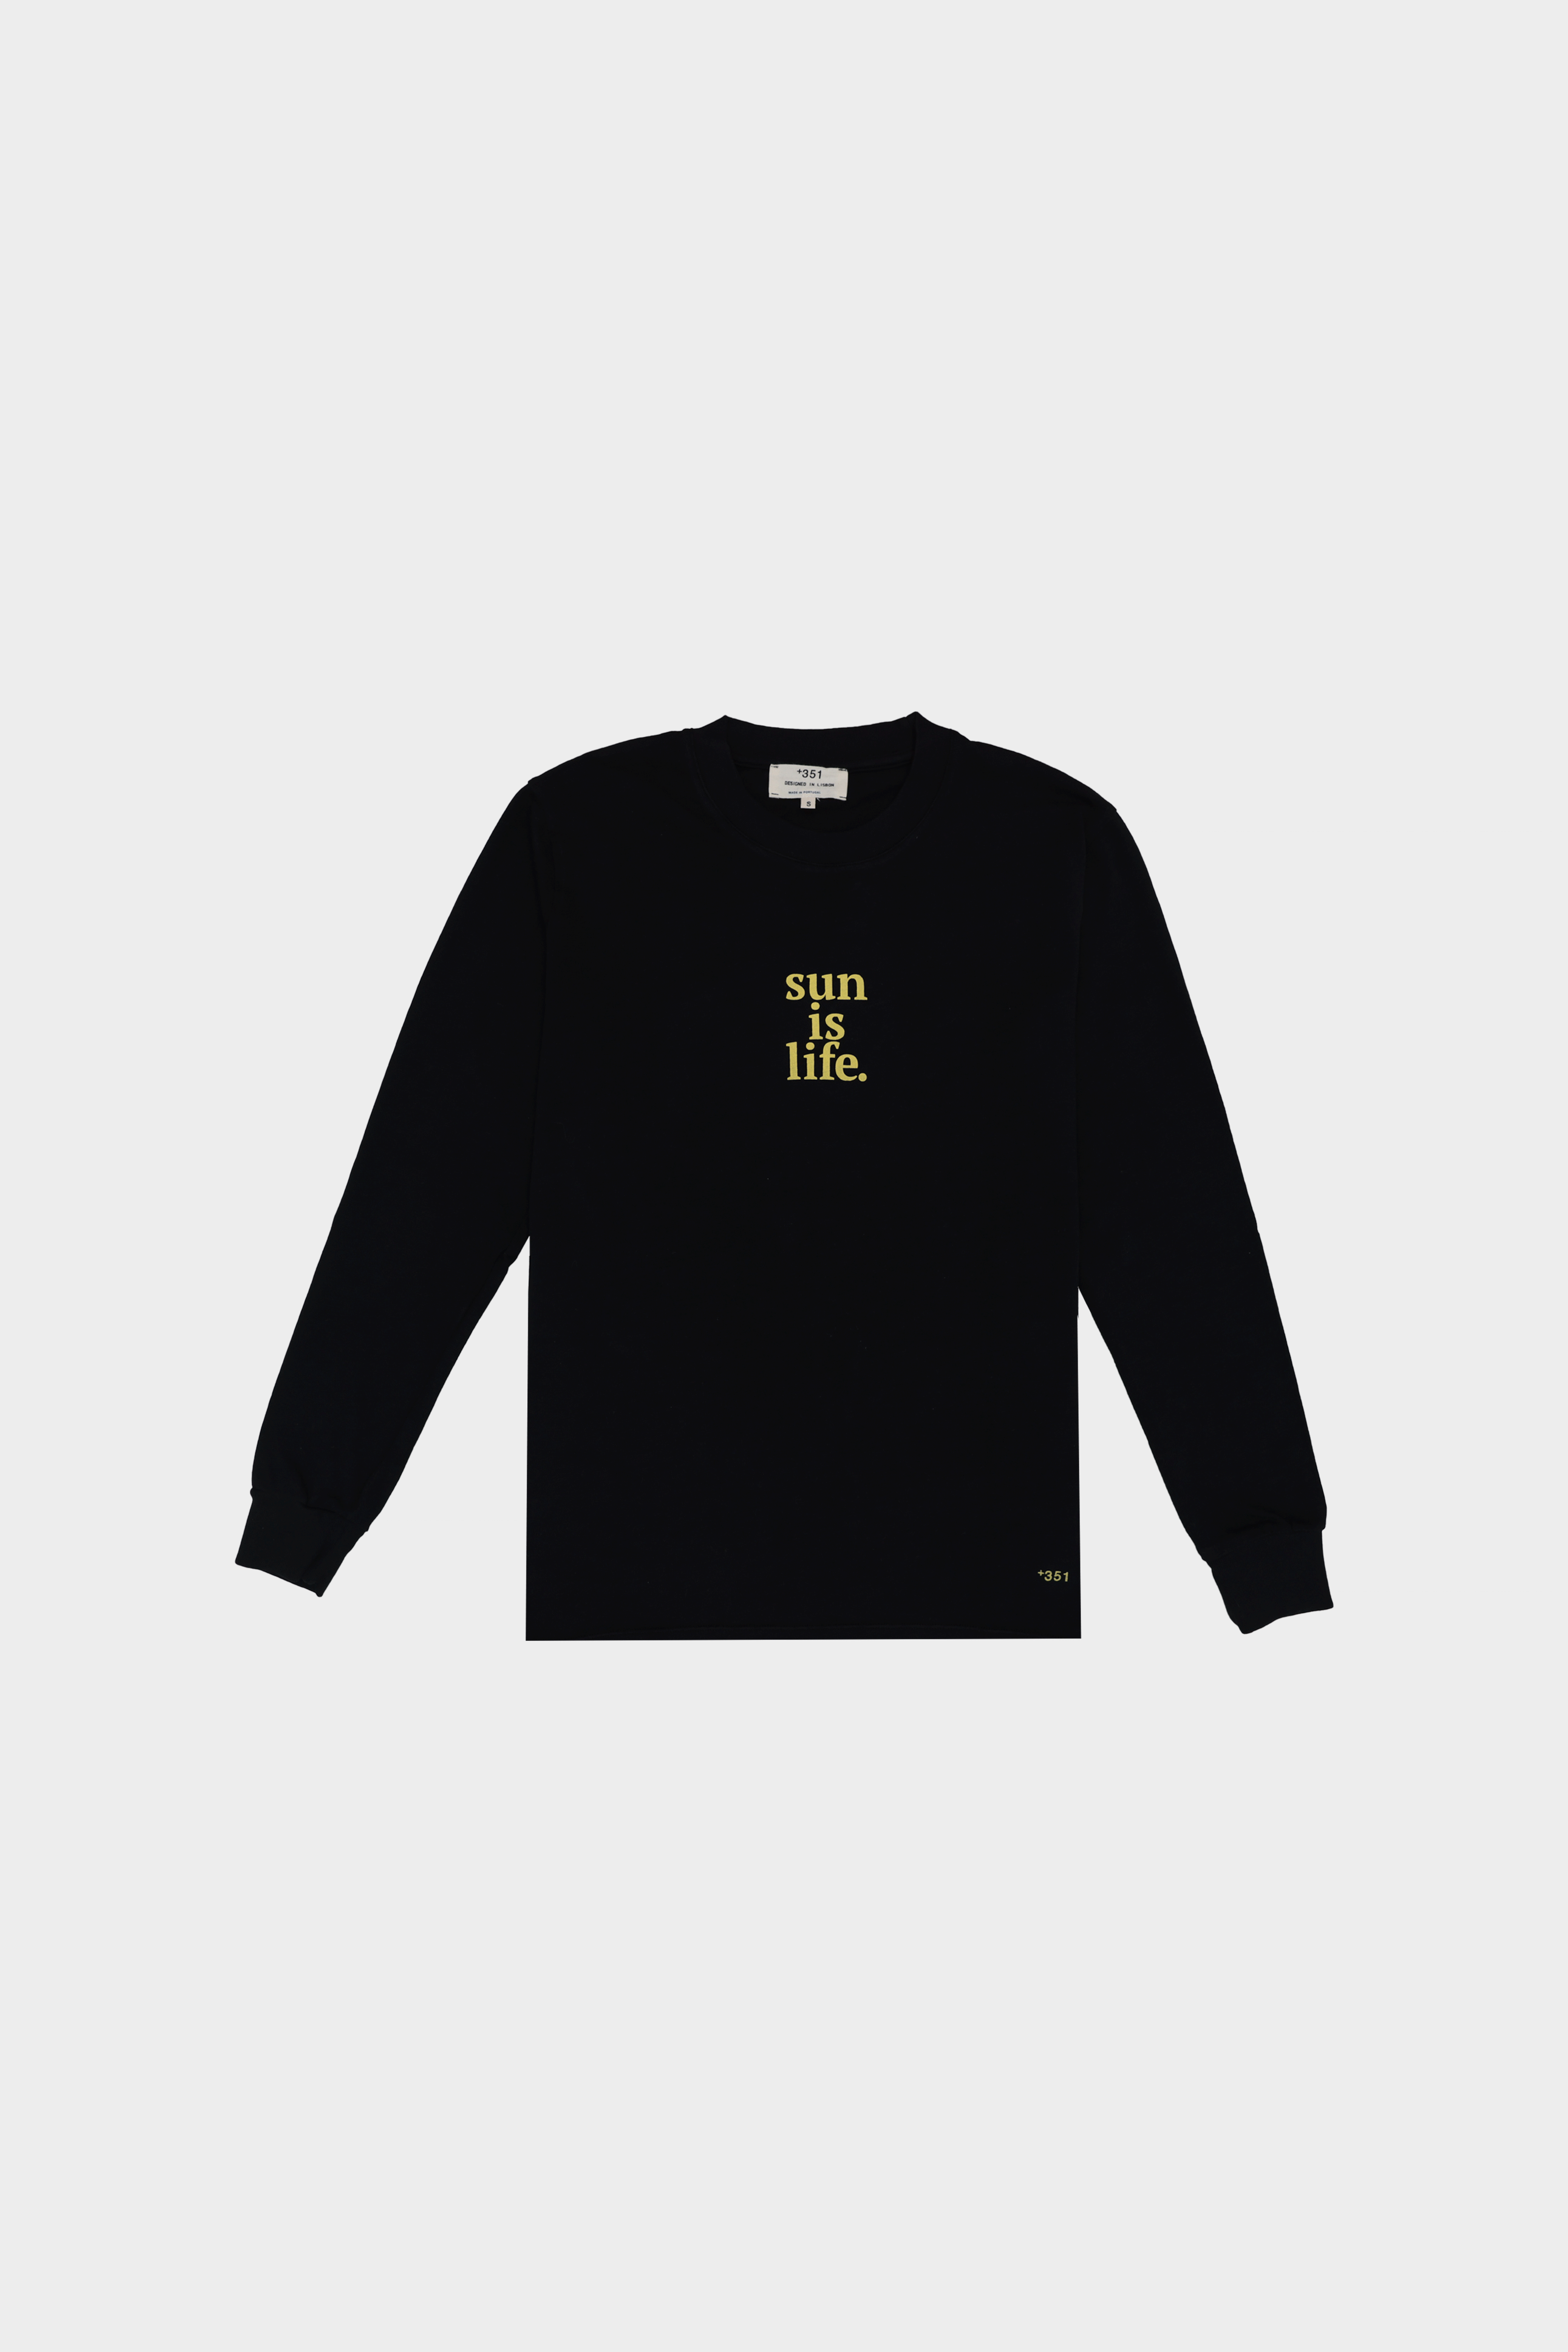 LONG SLEEVE GRAPHIC SUN IS LIFE BLACK & PALE YELLOW